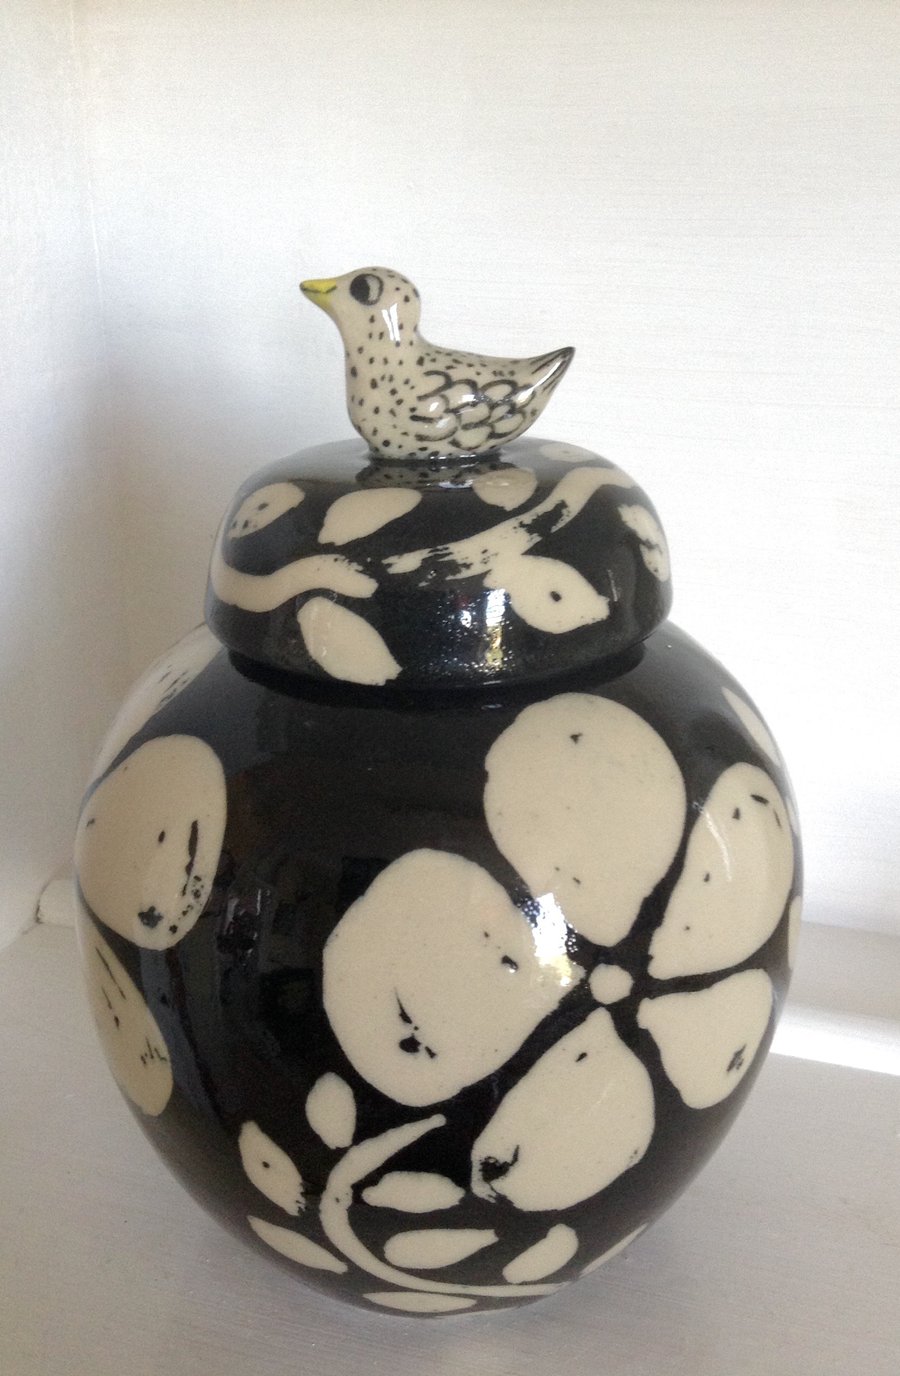 Storage jar in classic ginger jar shape with bird top